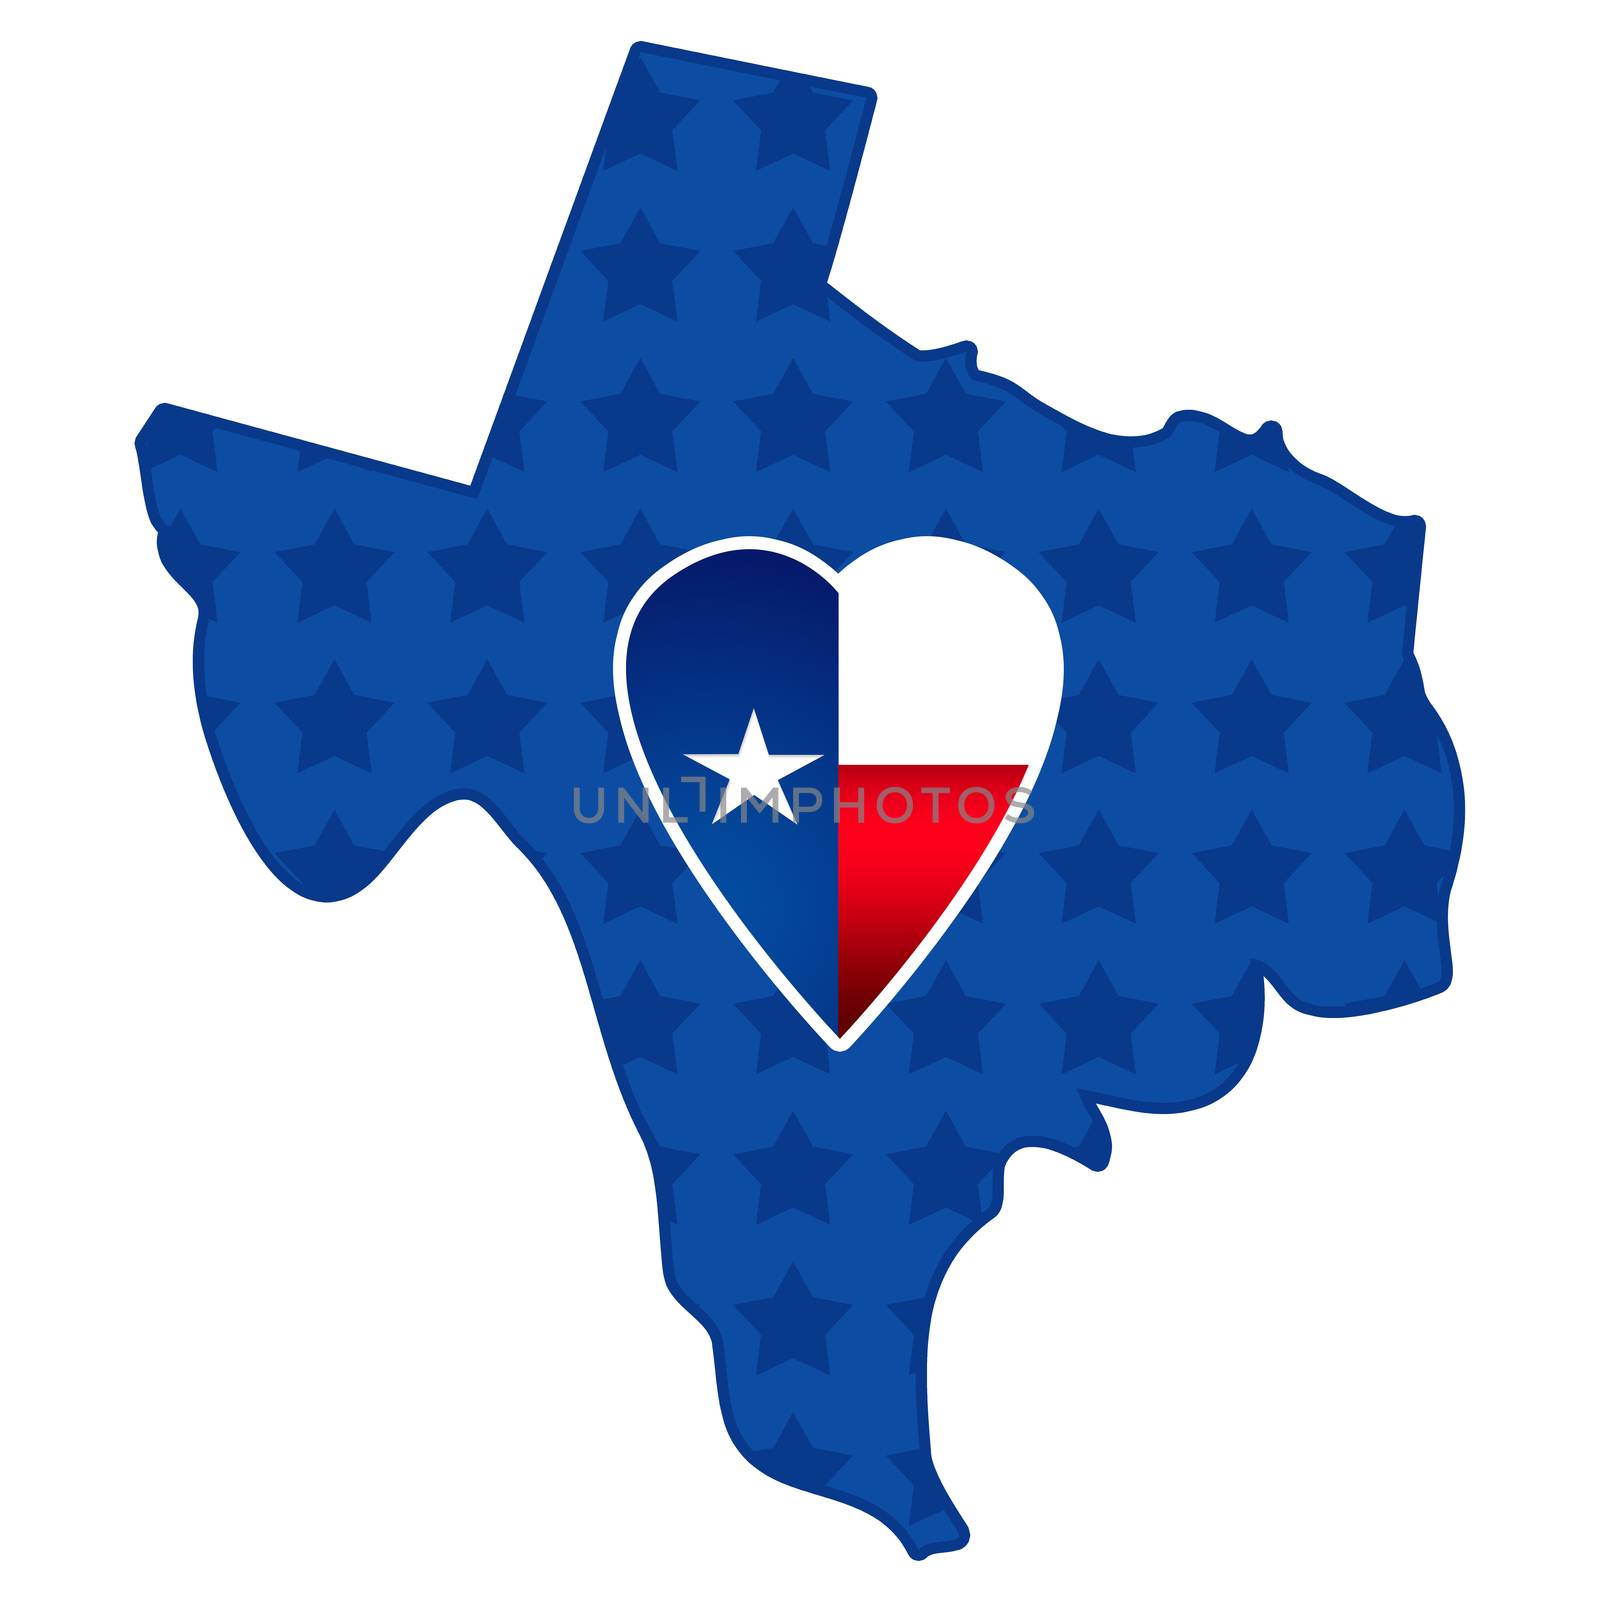 A Patriotic Heart housed in Texas